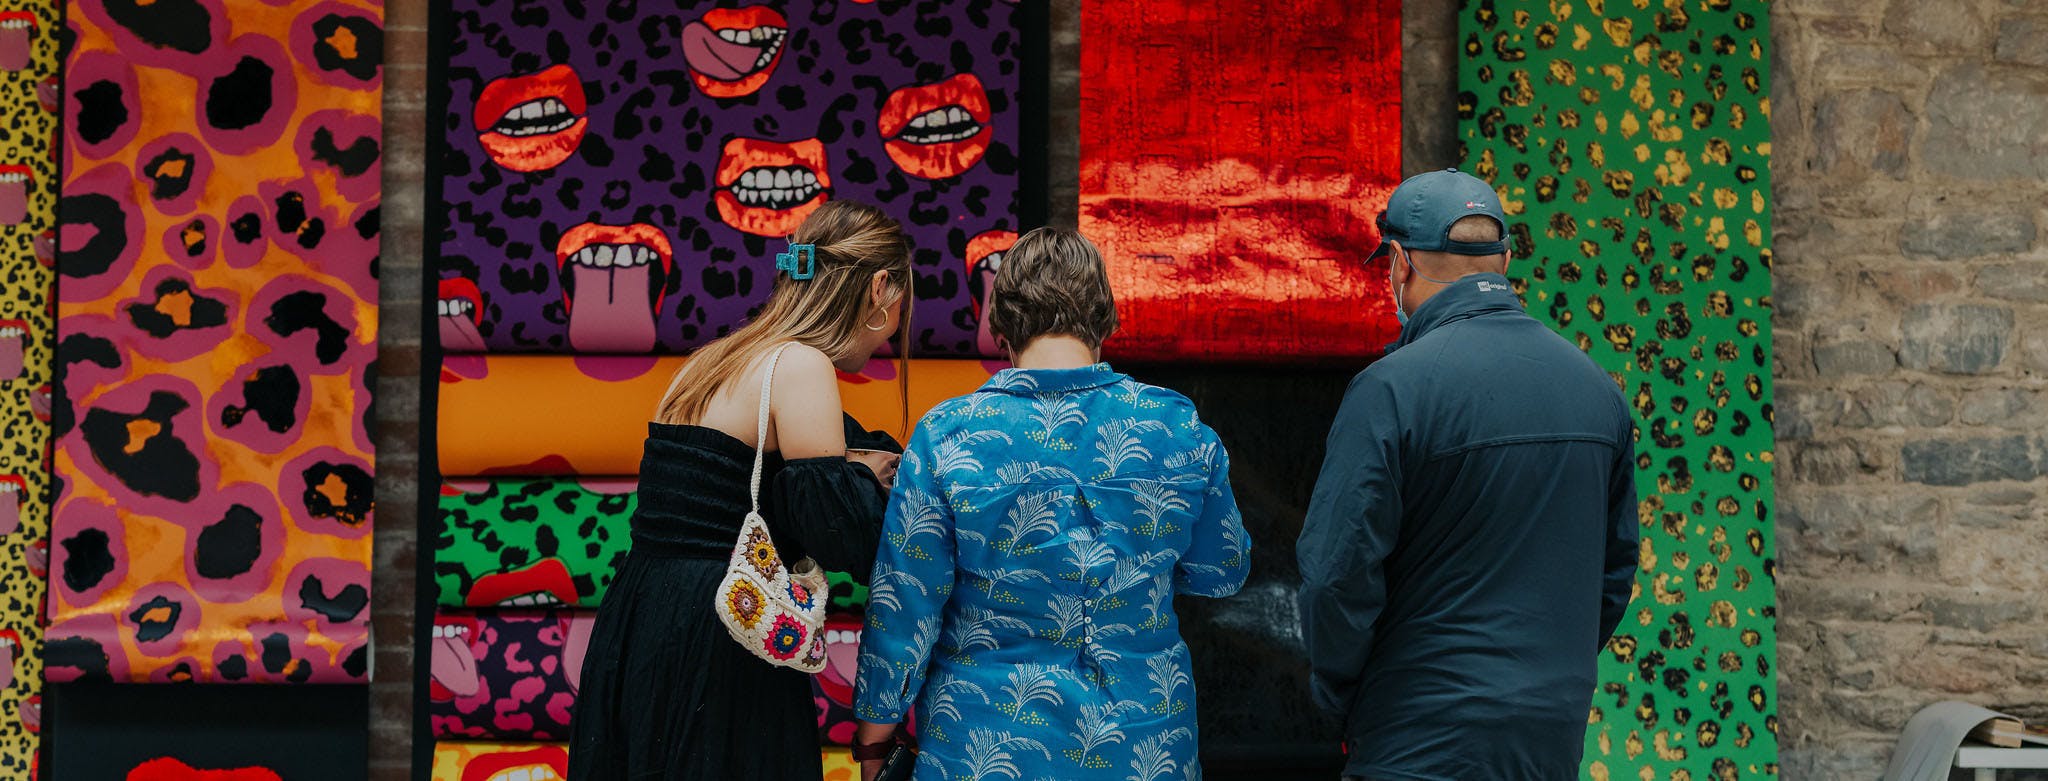 HERO visitors gather around colorful work hung on walls at the Textile Design Summer Show 2022 at Royal William Yard Photo by Luke Frost